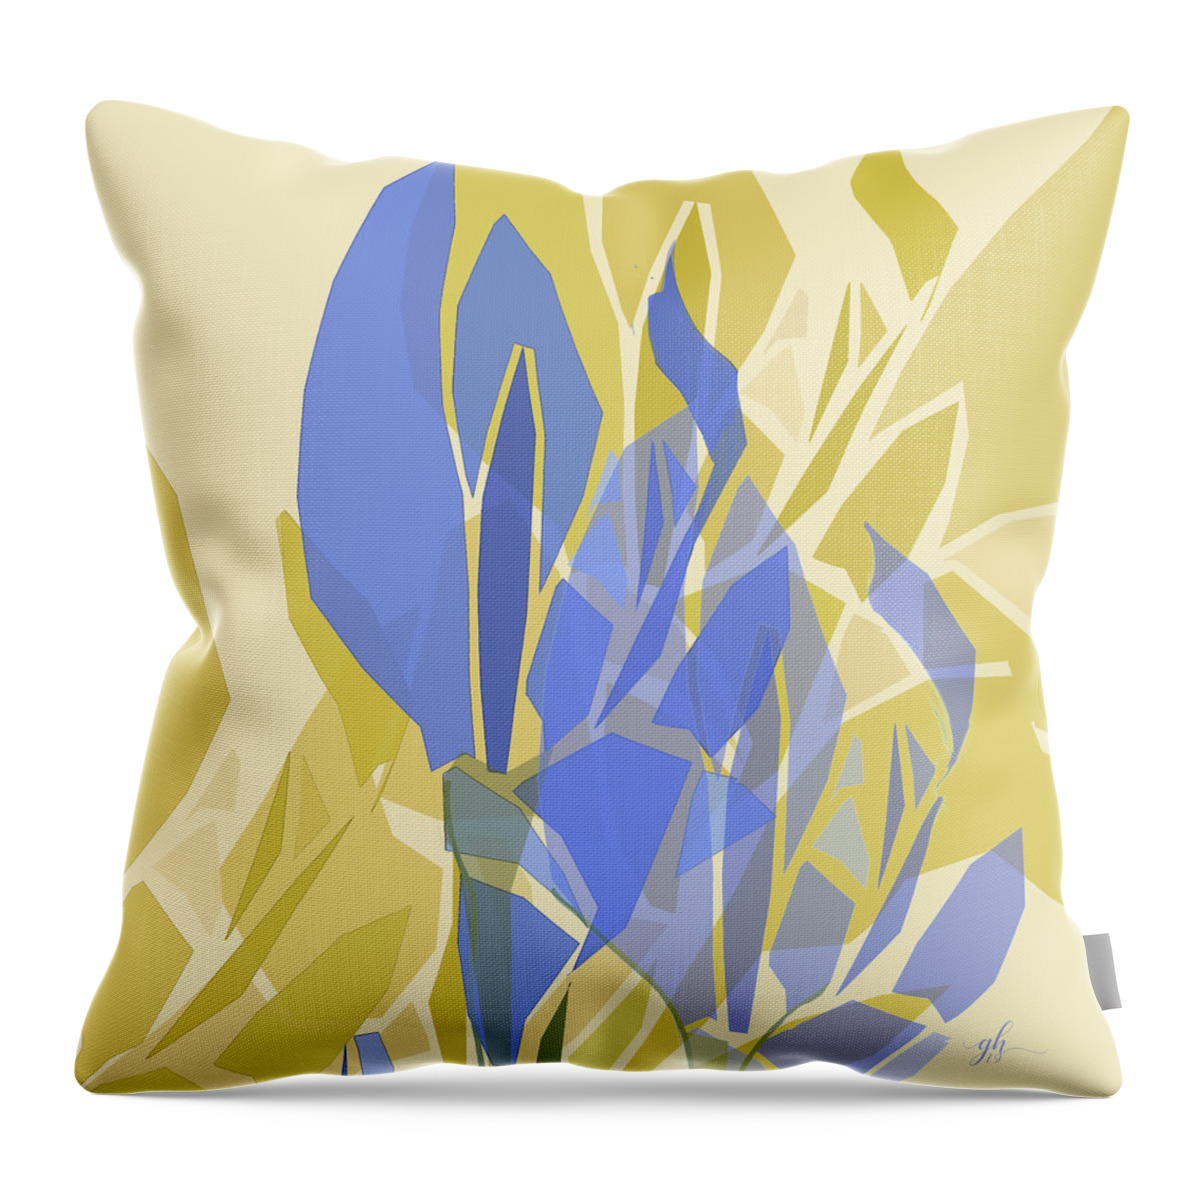 Floral Throw Pillow featuring the digital art Chanson by Gina Harrison